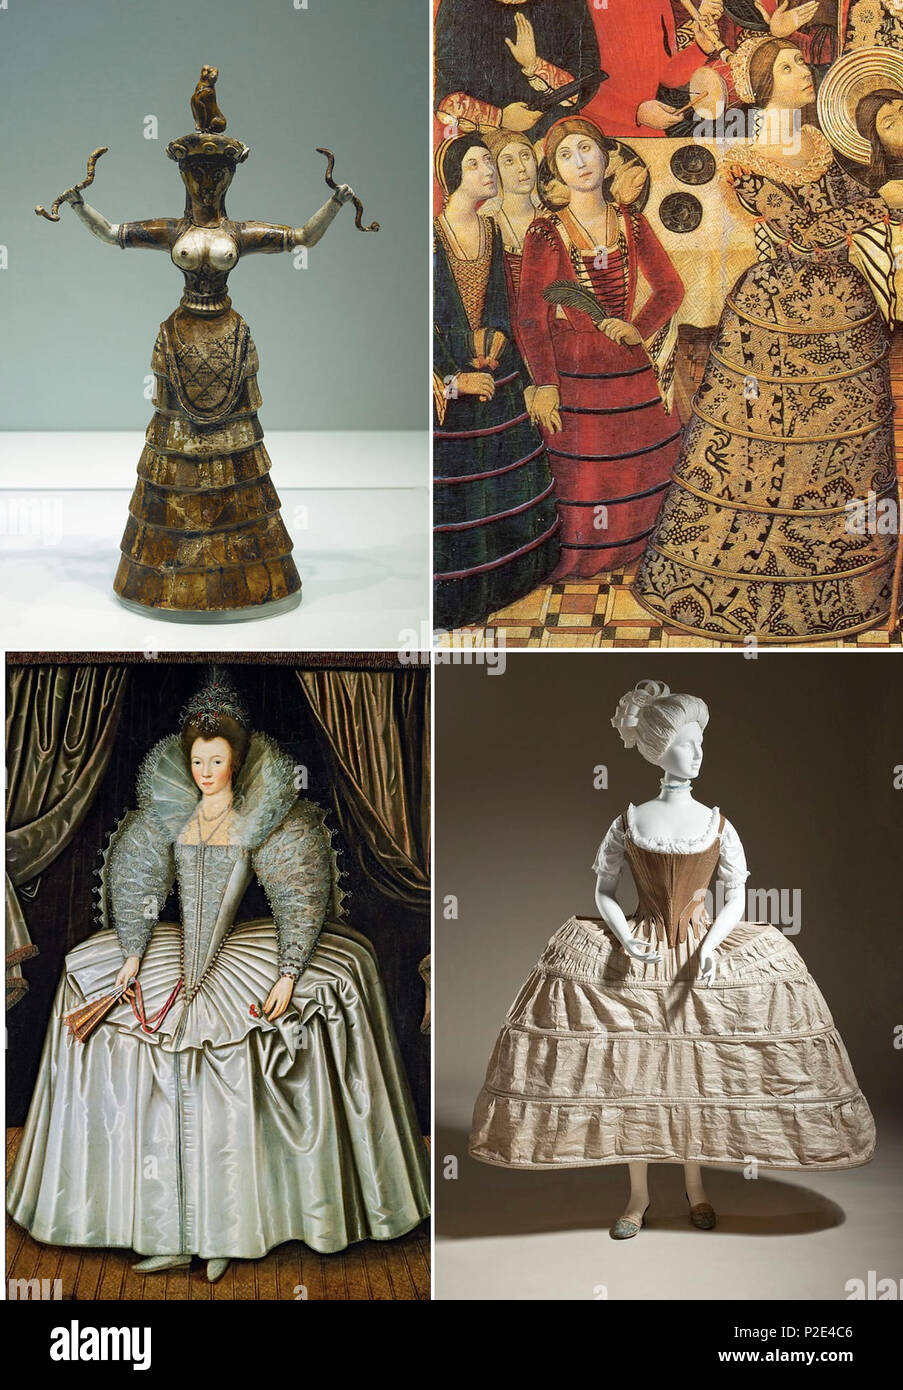 English: Examples of pre-19th century hoopskirts. The images are